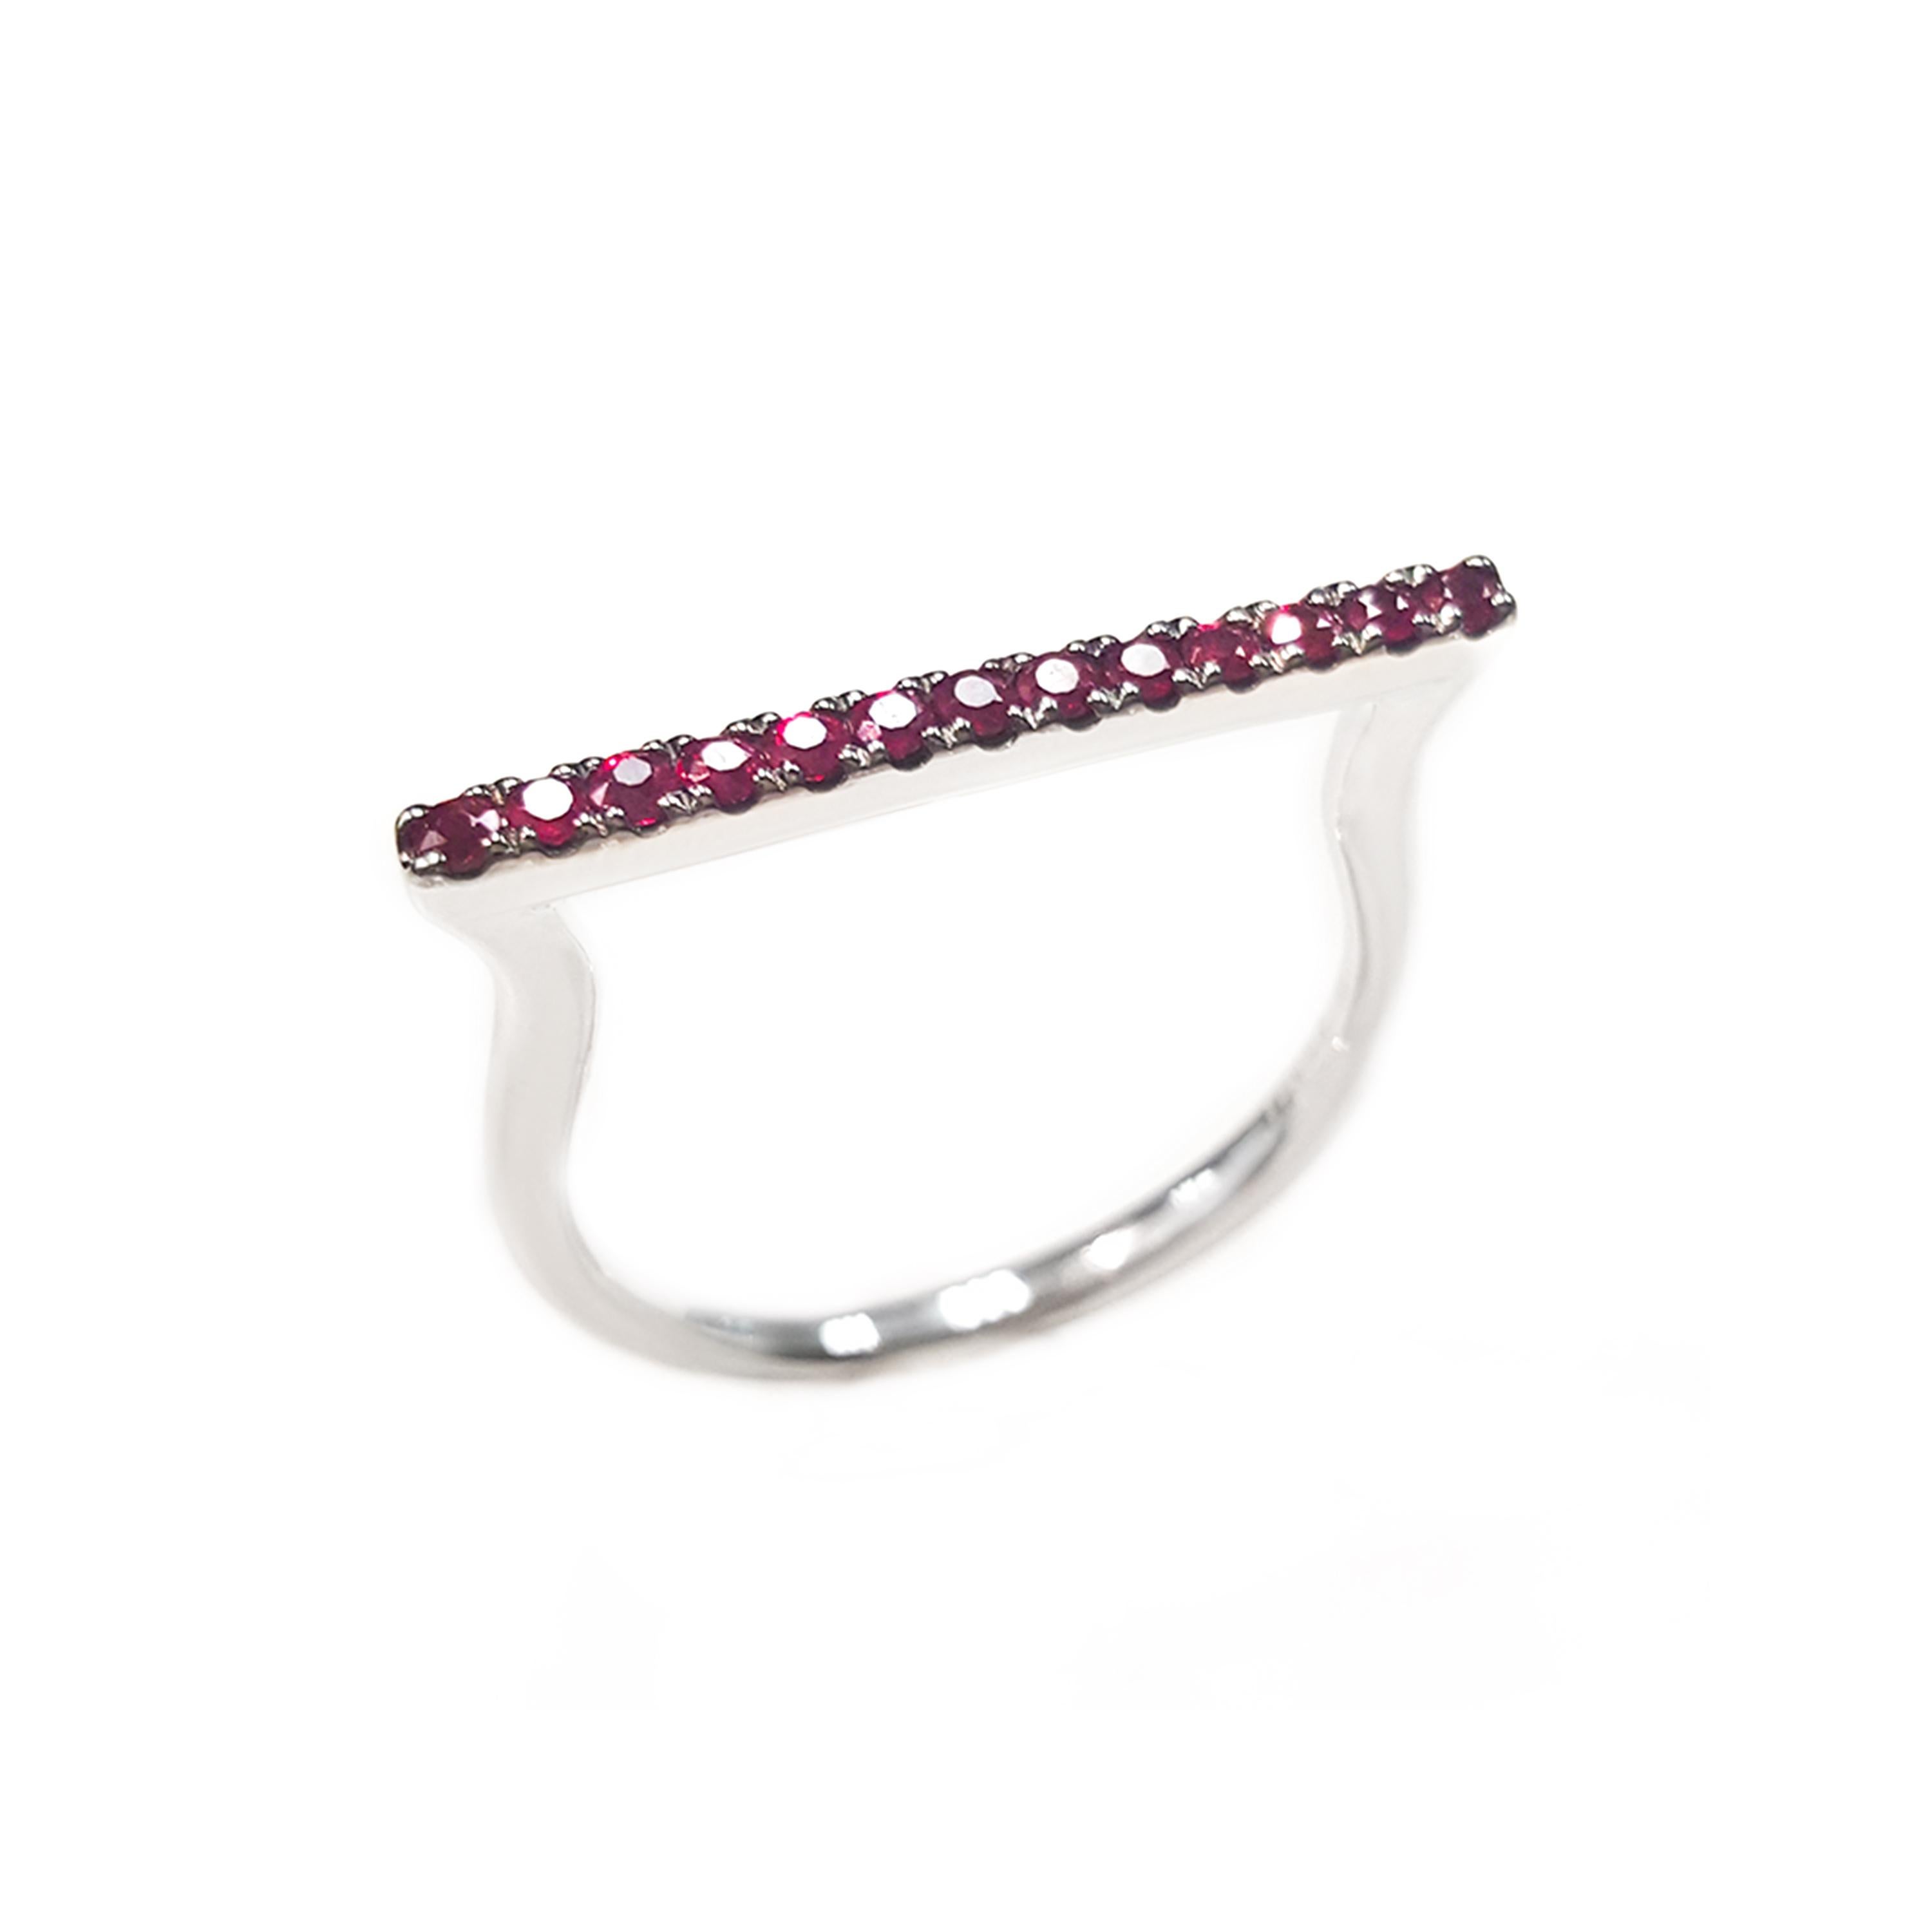 This ladies 14k white gold round ruby ring has 0.30ct of perfectly matched rubies. Comfort fit ring for everyday use. Ring size 7